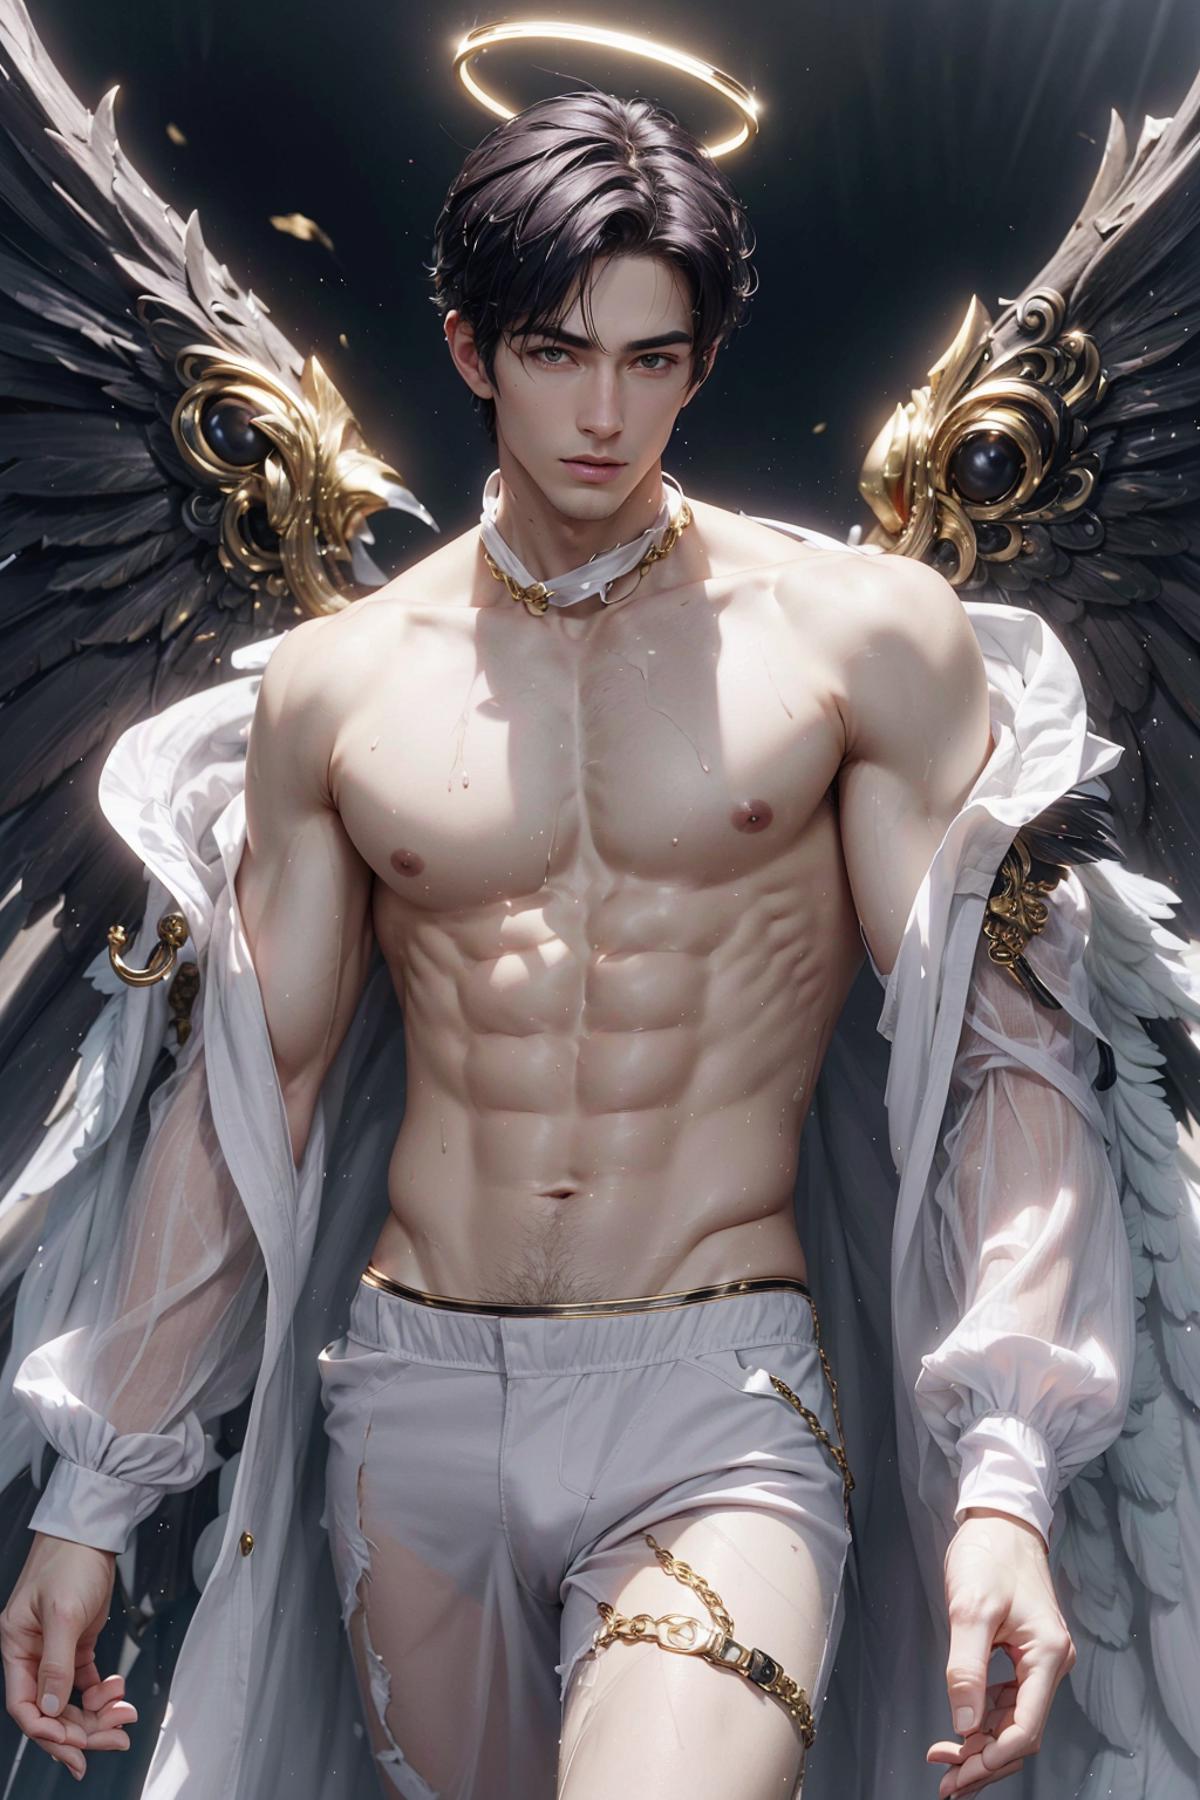 Muscular man wearing white pants and wings, possibly an angel or a warrior.